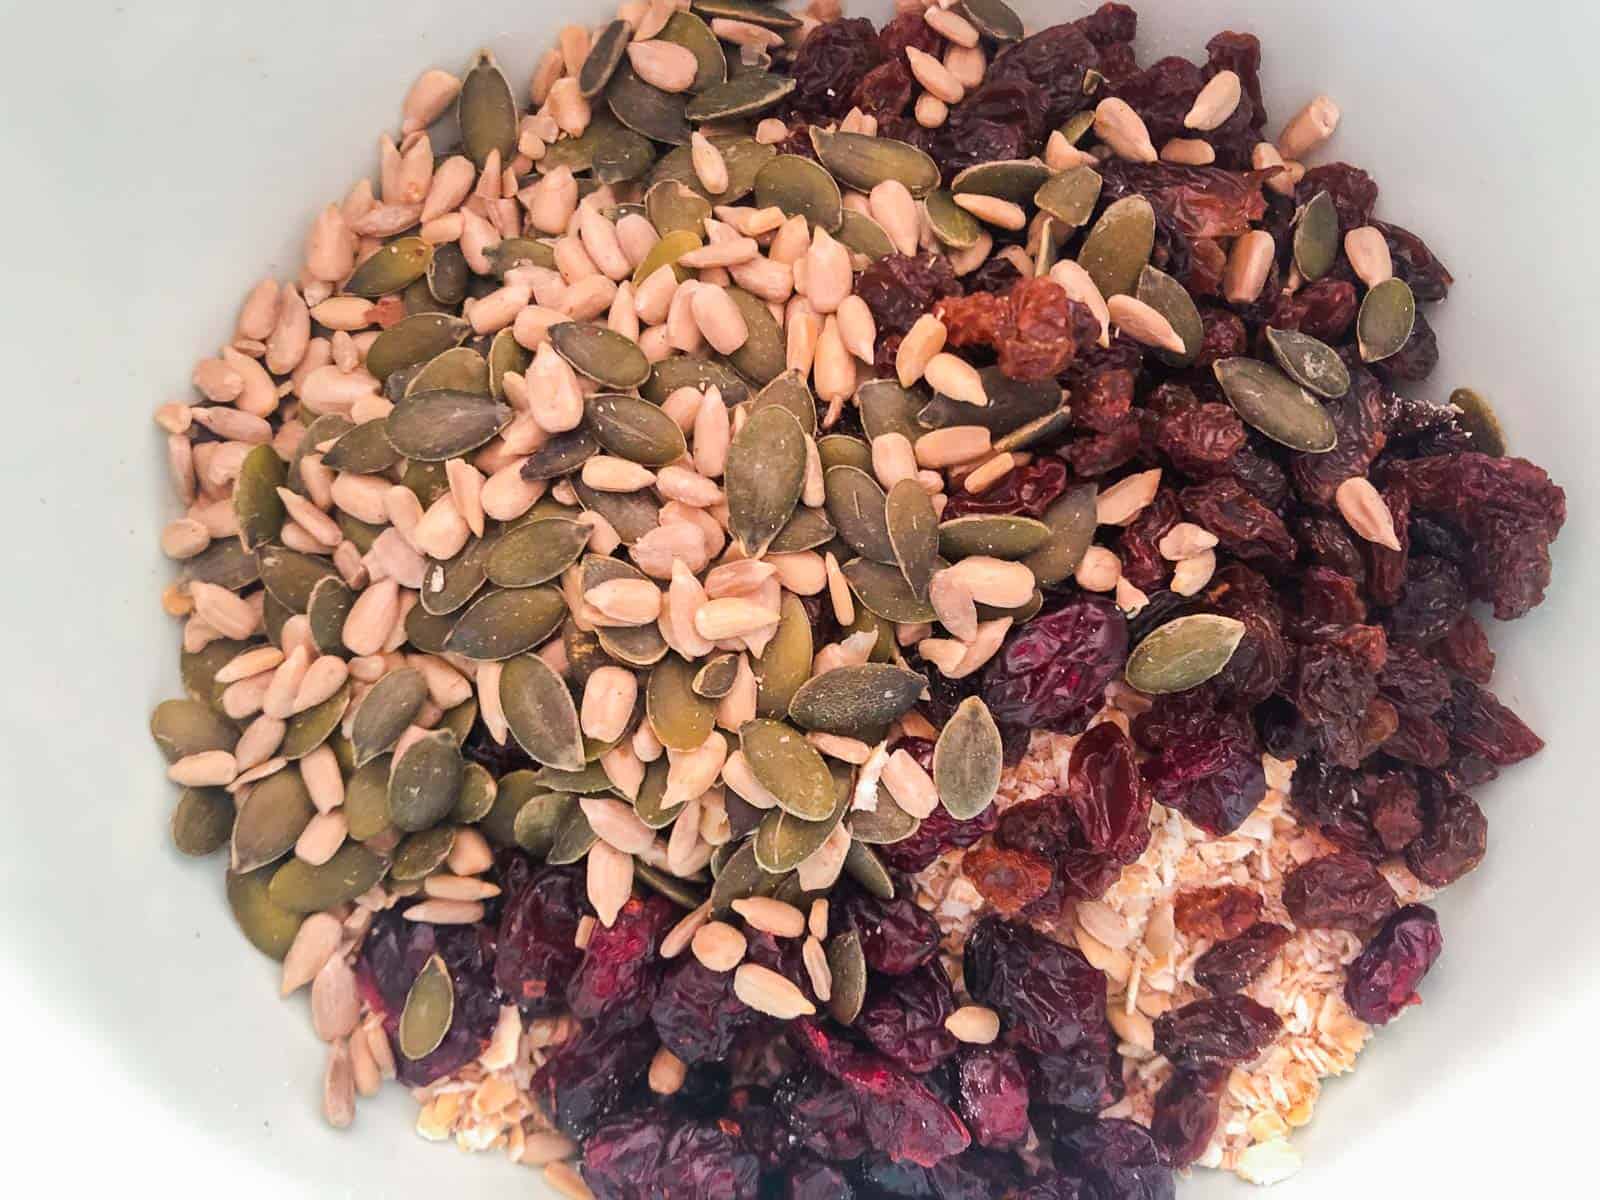 Oats, seeds and dried fruit mixture.